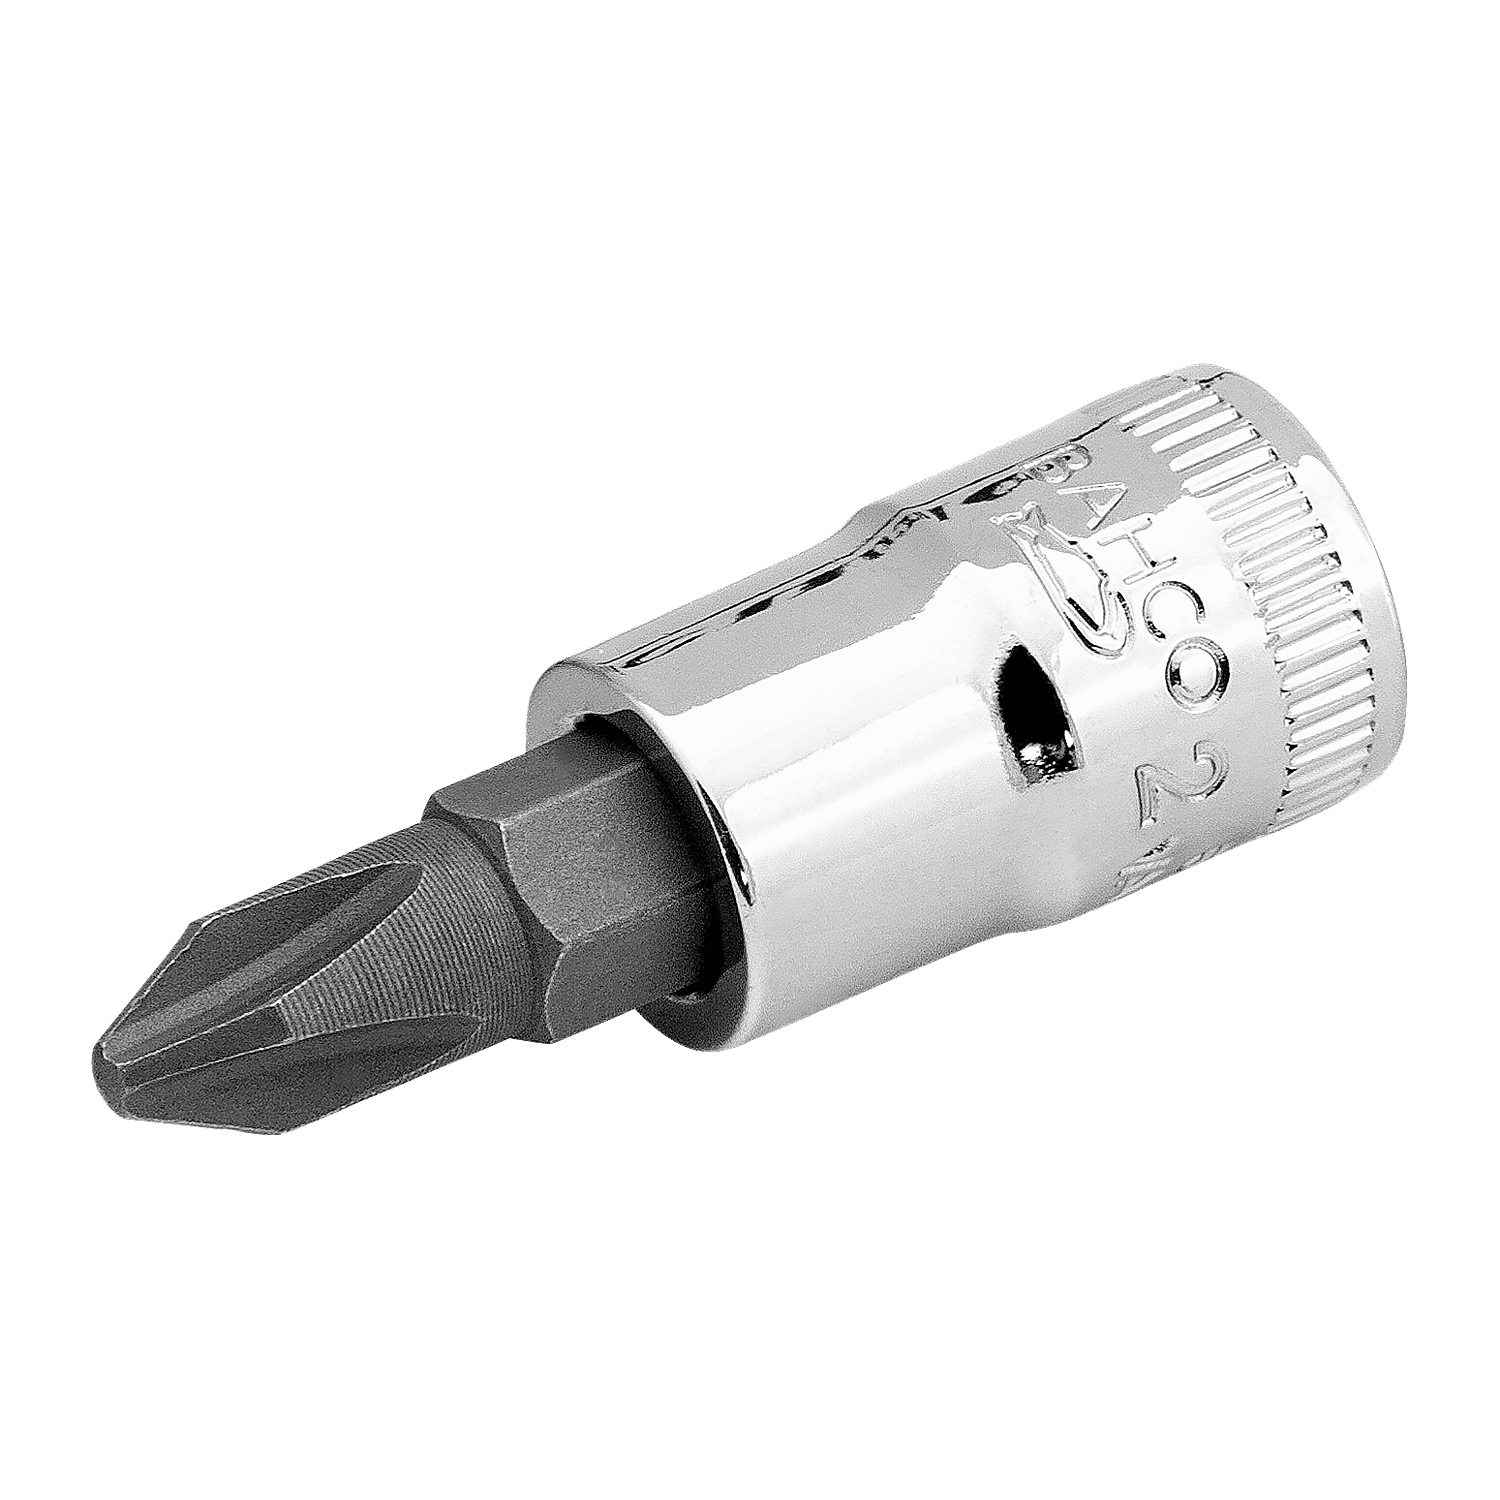 BAHCO 6709PH 1/4” Screwdriver Socket Philips Head Square Drive - Premium Screwdriver Socket from BAHCO - Shop now at Yew Aik.